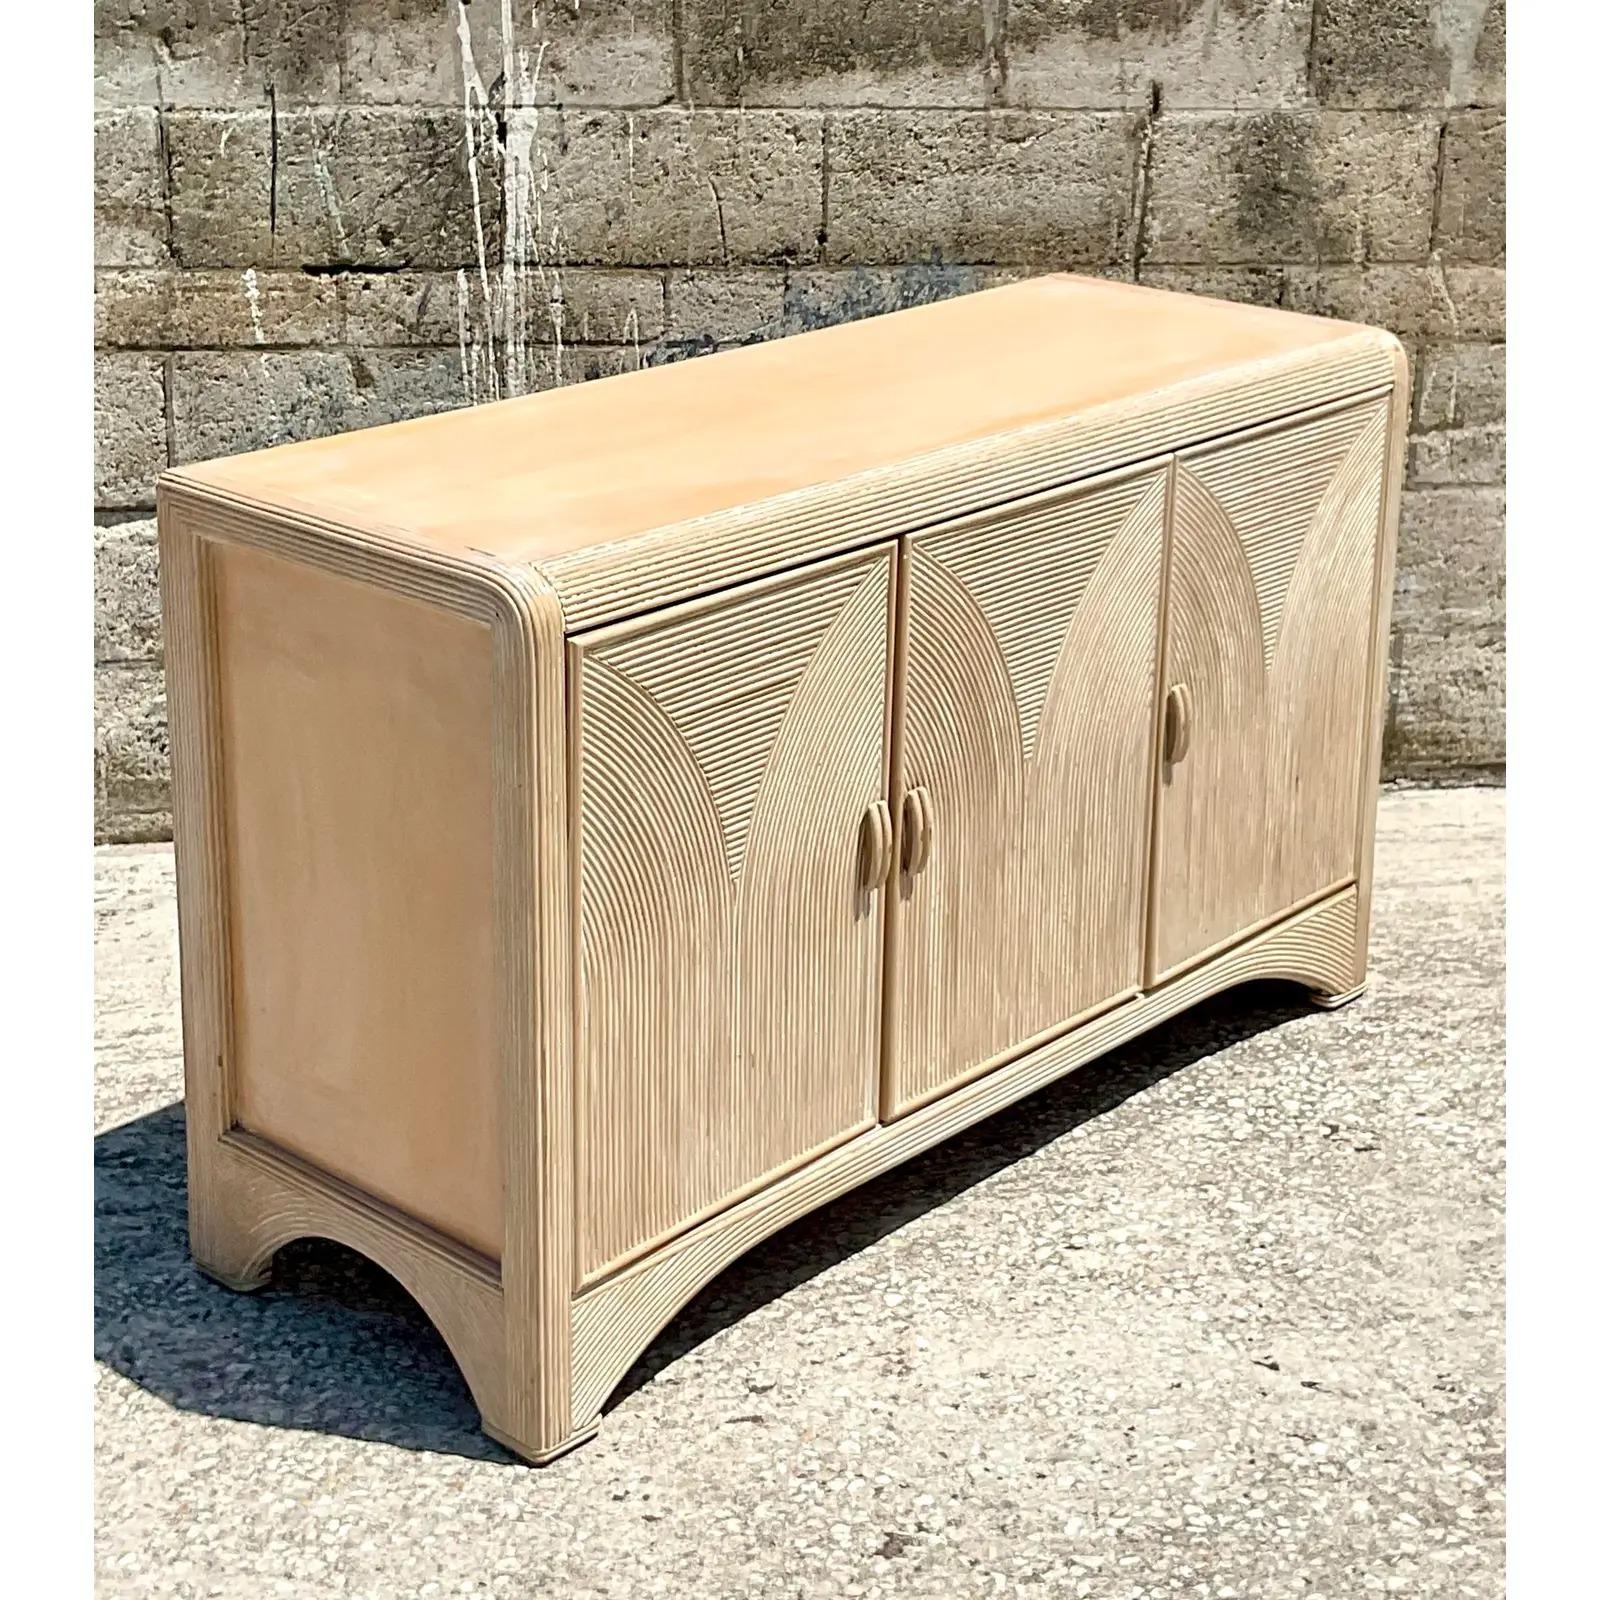 Fantastic vintage Coastal credenza. Beautiful cerused finish in a chic arched design. Lots of great storage below. Acquired from a Palm Beach estate.